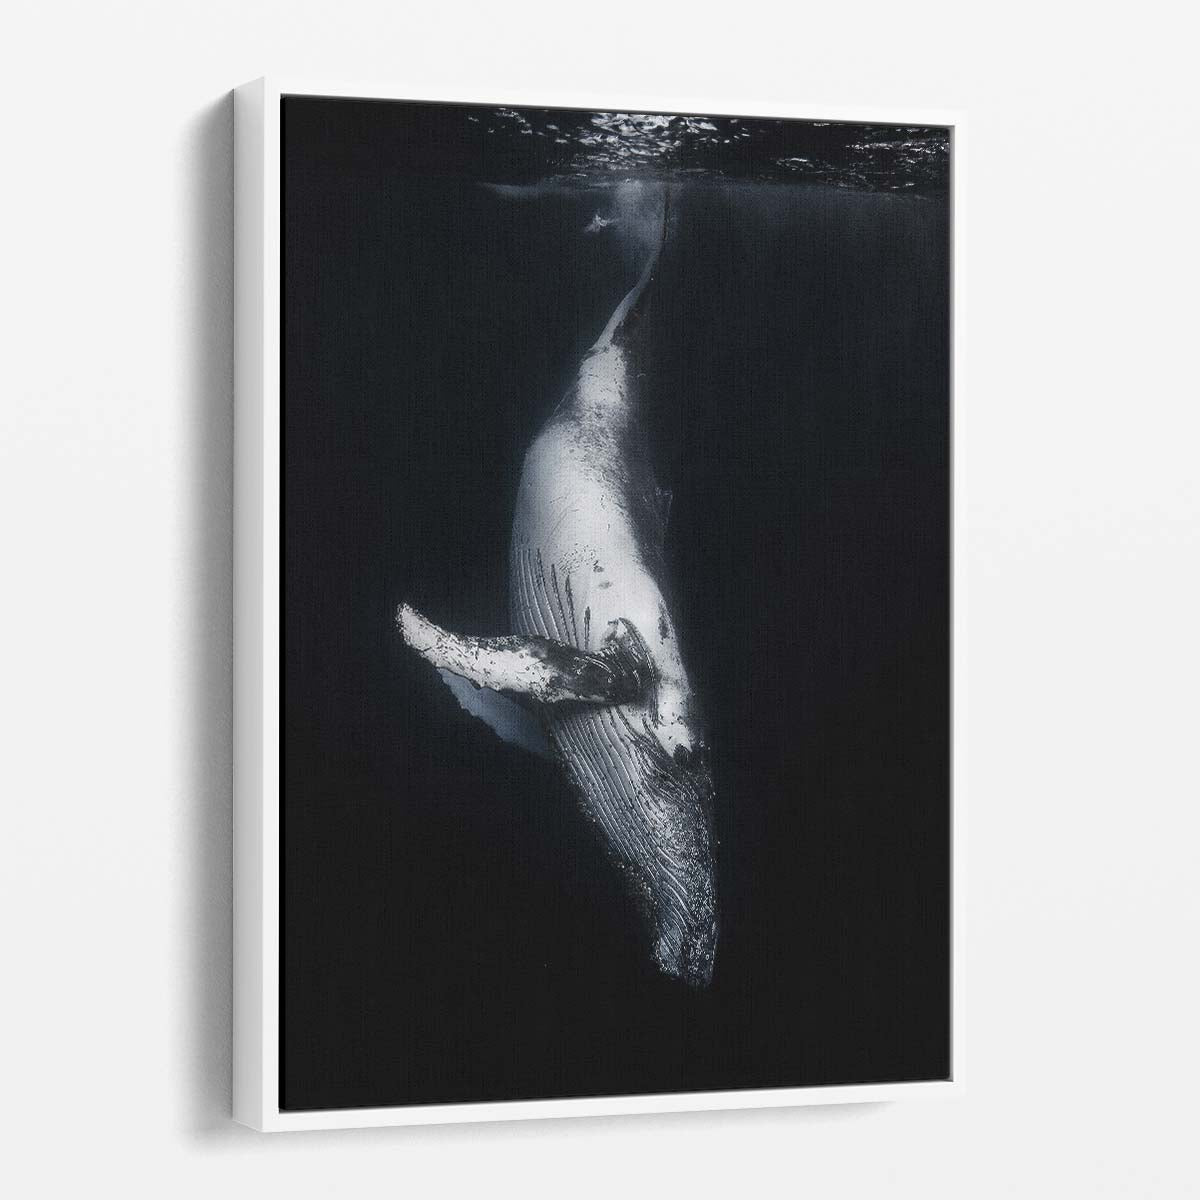 Majestic Humpback Whale Underwater Photography, Reunion Island France by Luxuriance Designs, made in USA